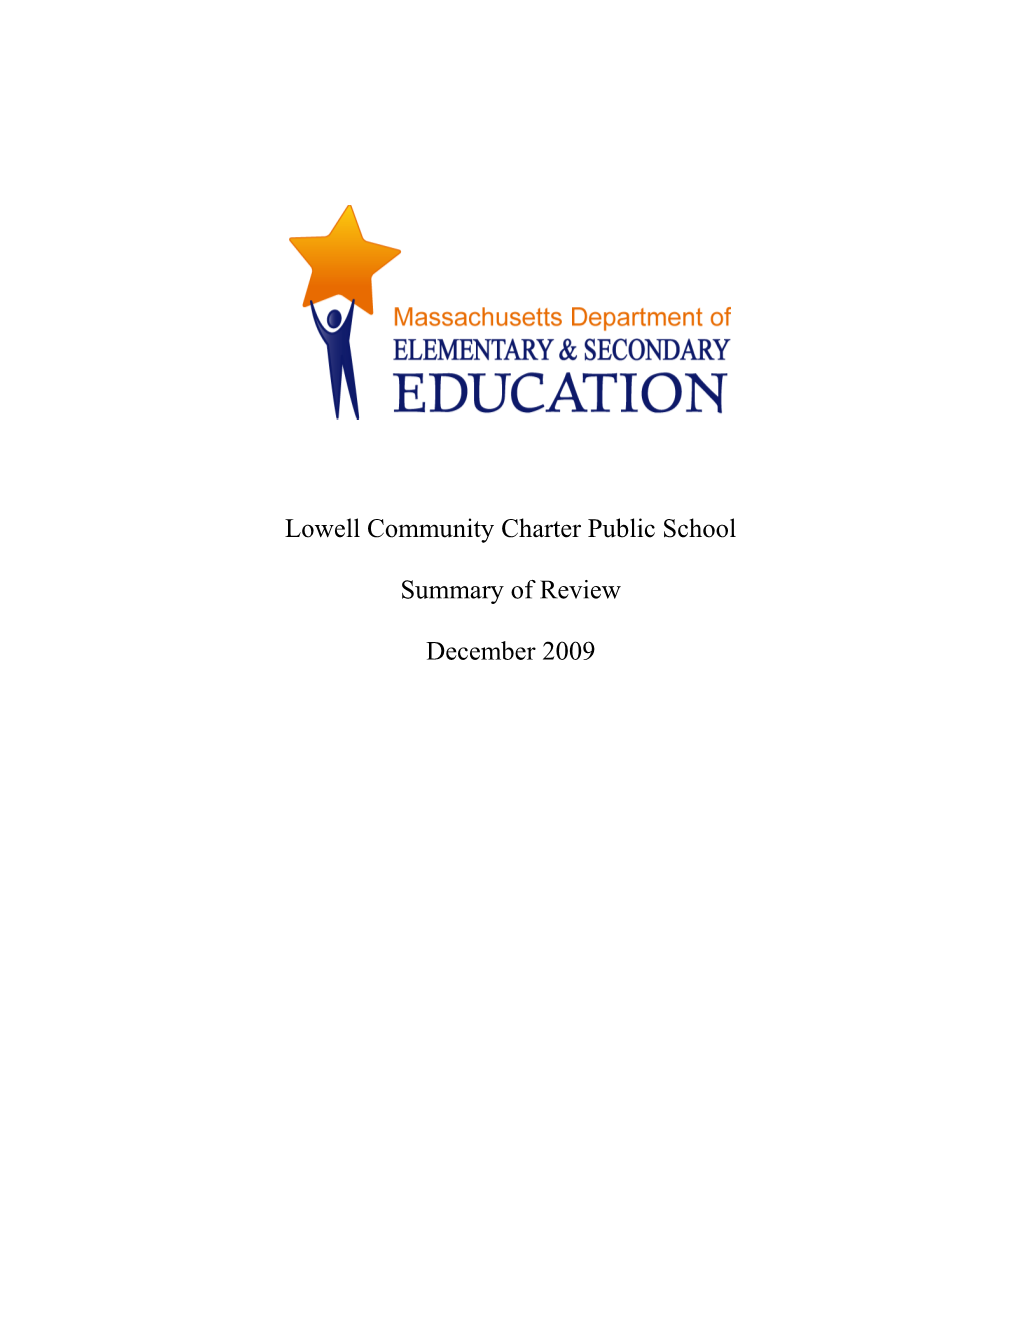 Summary of Review, Lowell Community Charter Public School, December 2009